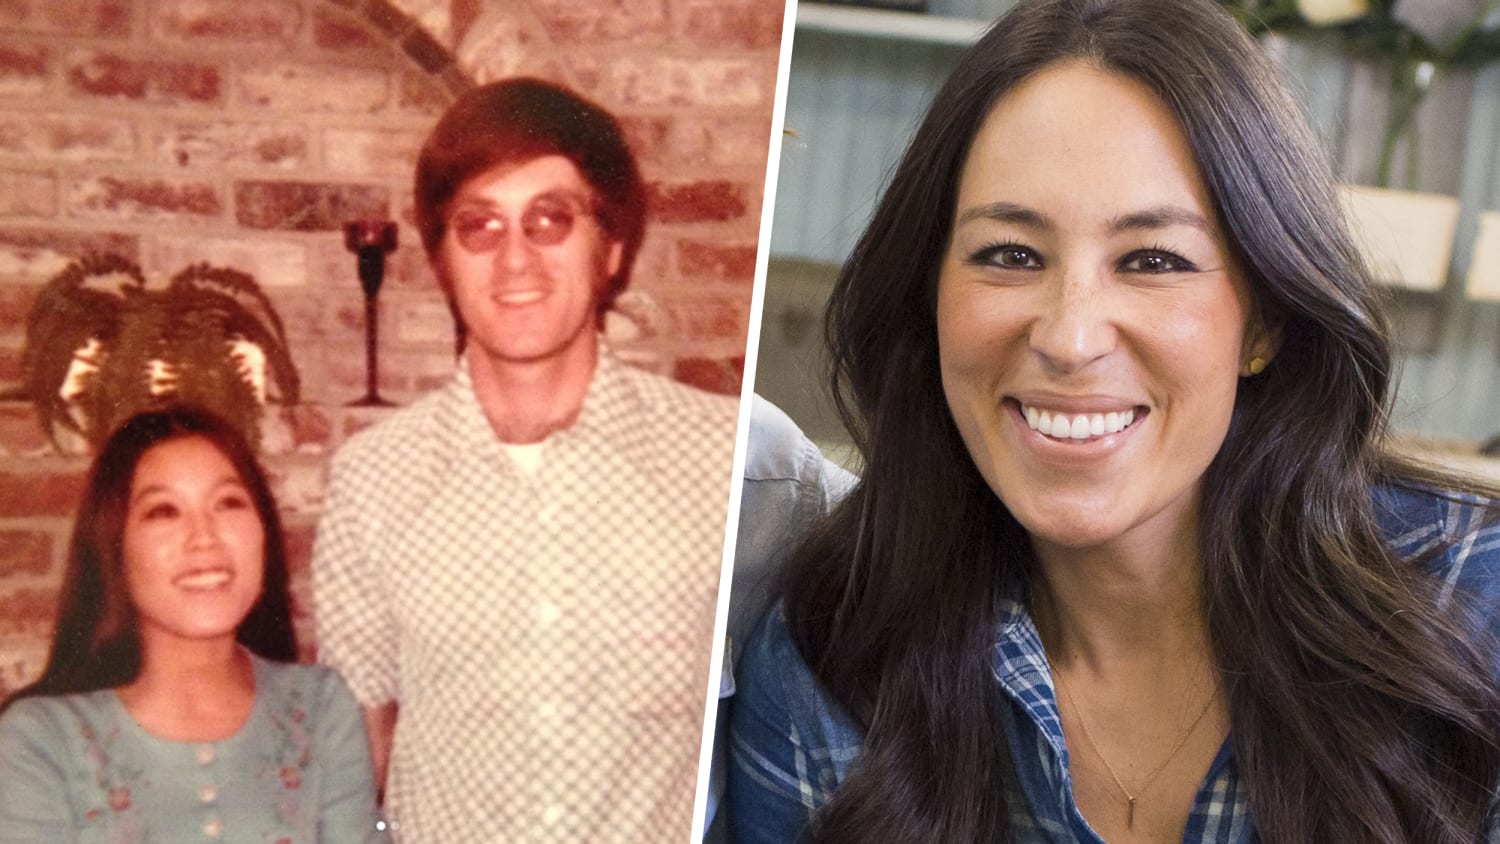 Joanna Gaines honors parents' 45th anniversary: 'An example of how to love'